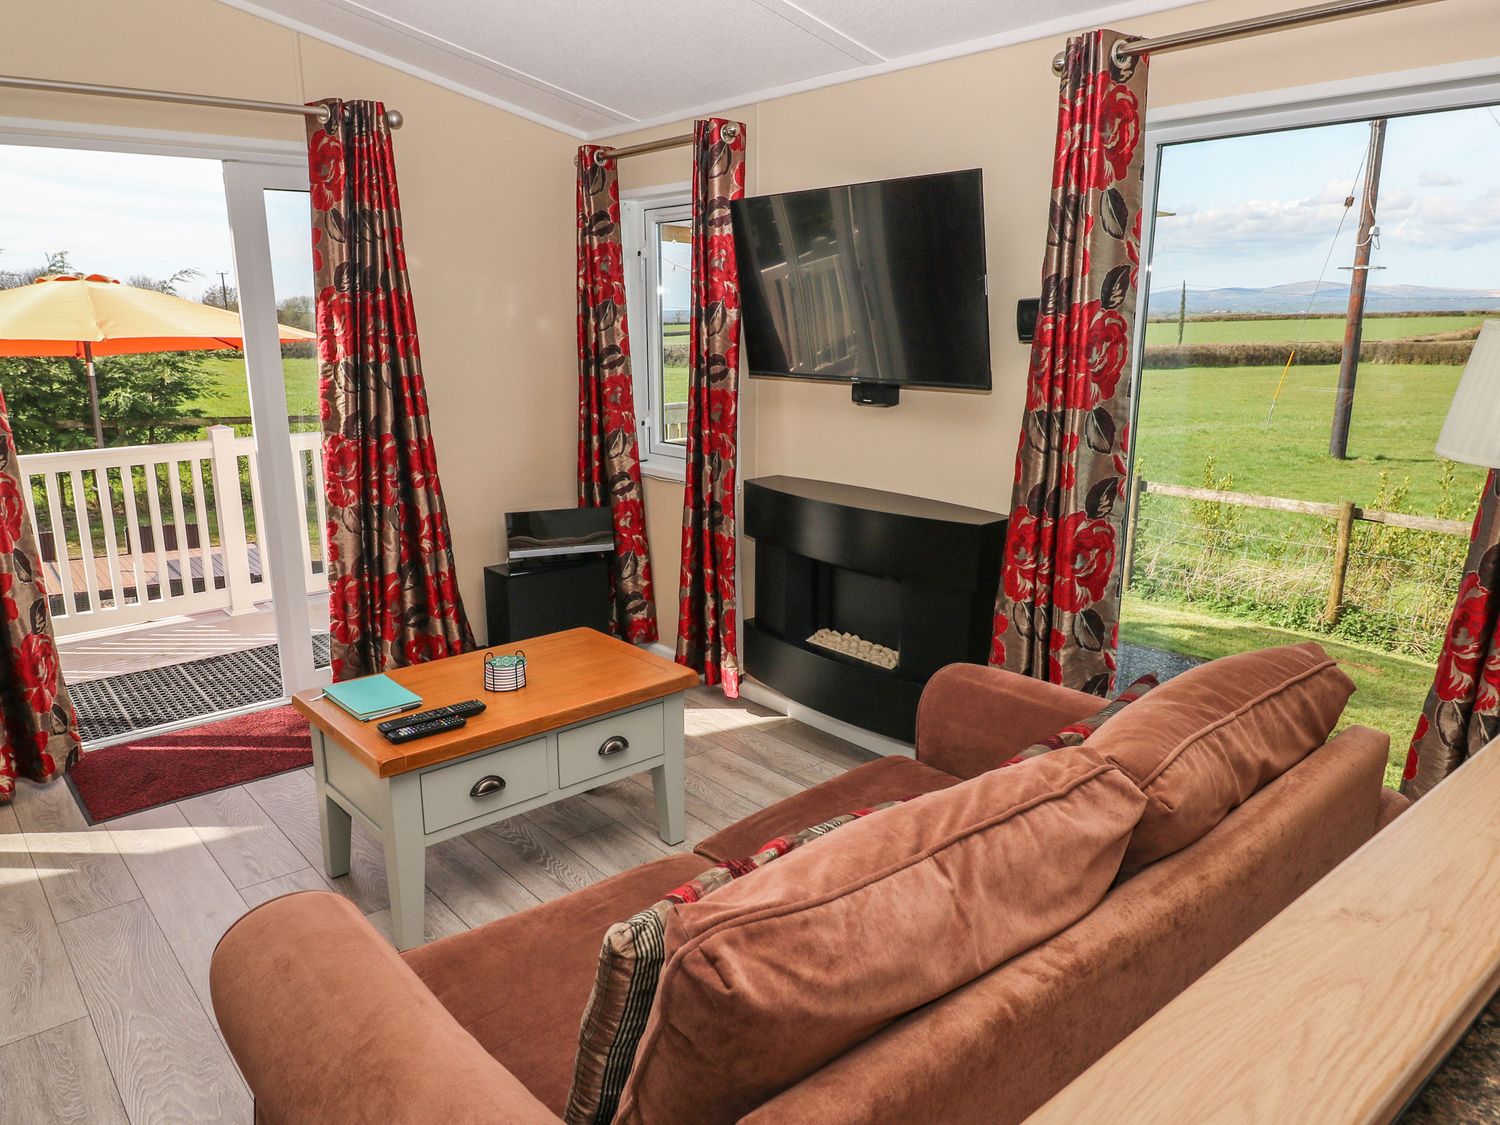 Mountain View Lodge in Tavernspite near Whitland in Pembrokeshire, dog-friendly, decking, 3bedrooms.